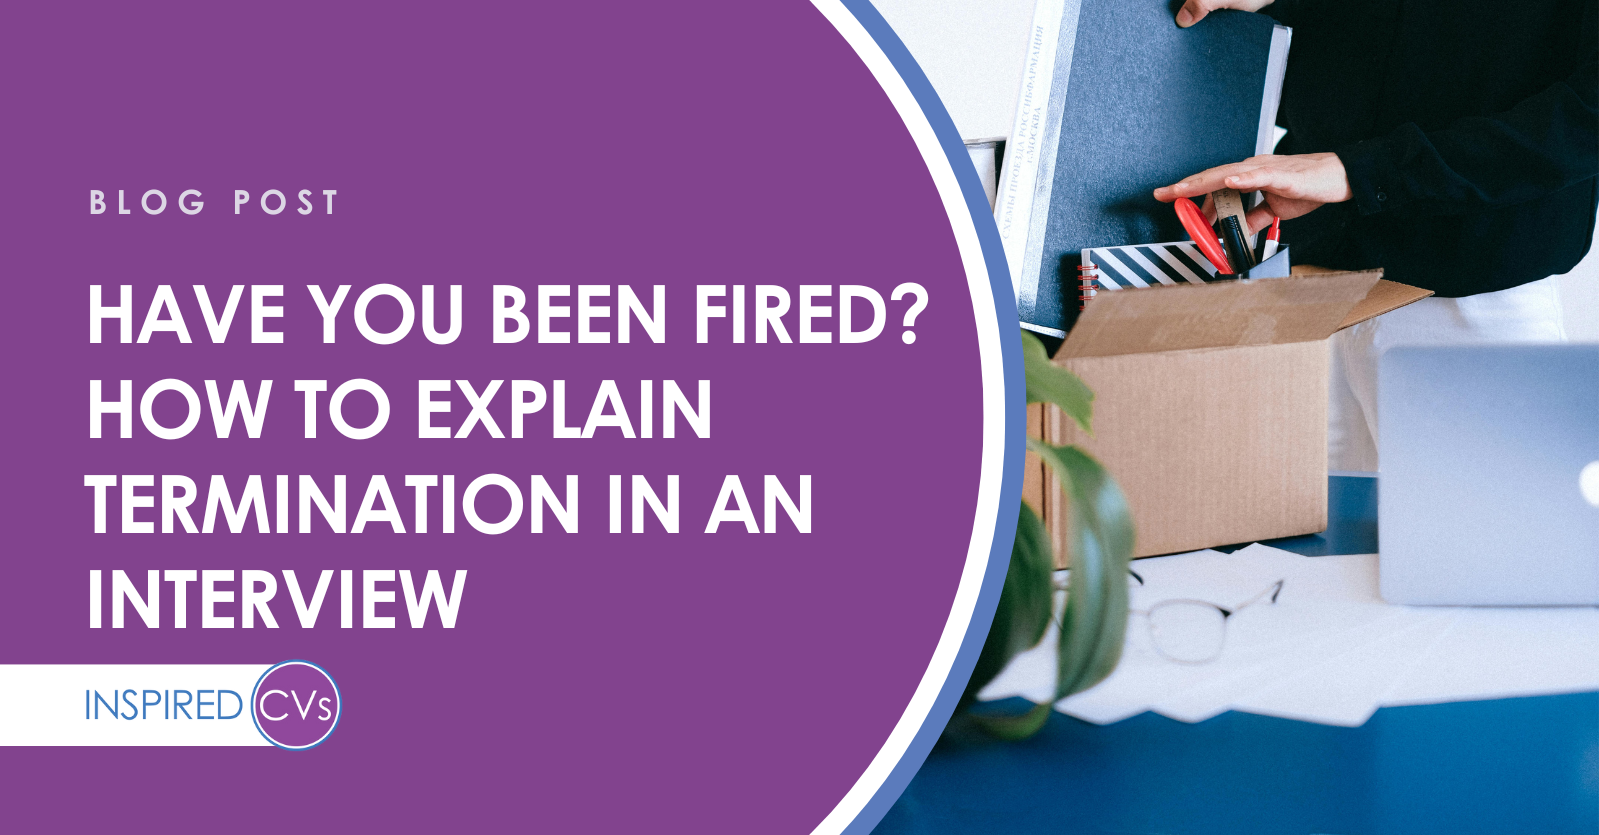 Have You Been Fired? - How to Explain Termination in an Interview